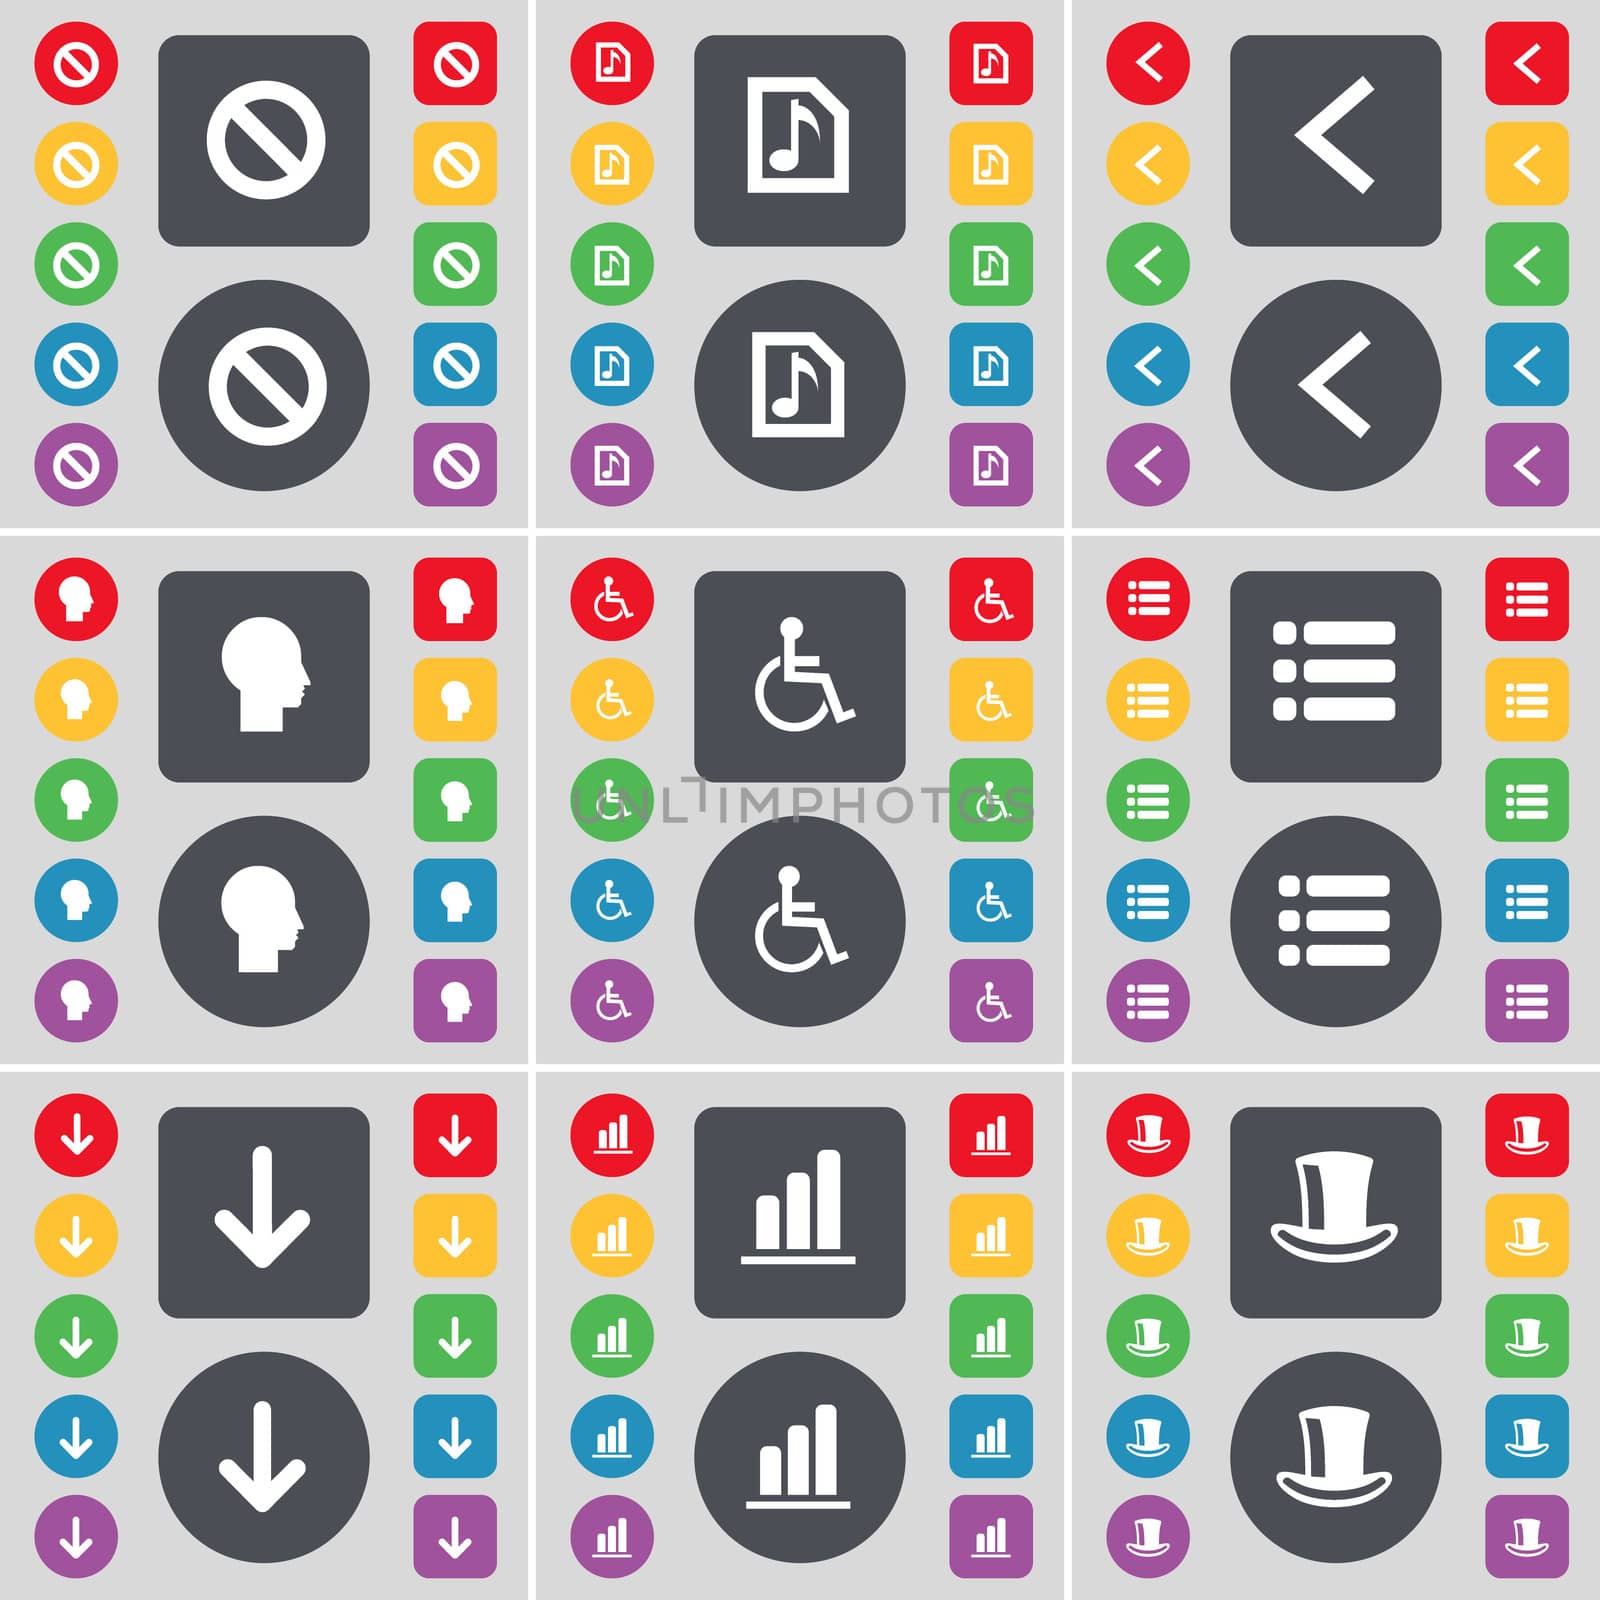 Stop, Music file, Arrow left, Silhouette, Disabled person, List, Arrow down, Diagram, Silk hat icon symbol. A large set of flat, colored buttons for your design.  by serhii_lohvyniuk